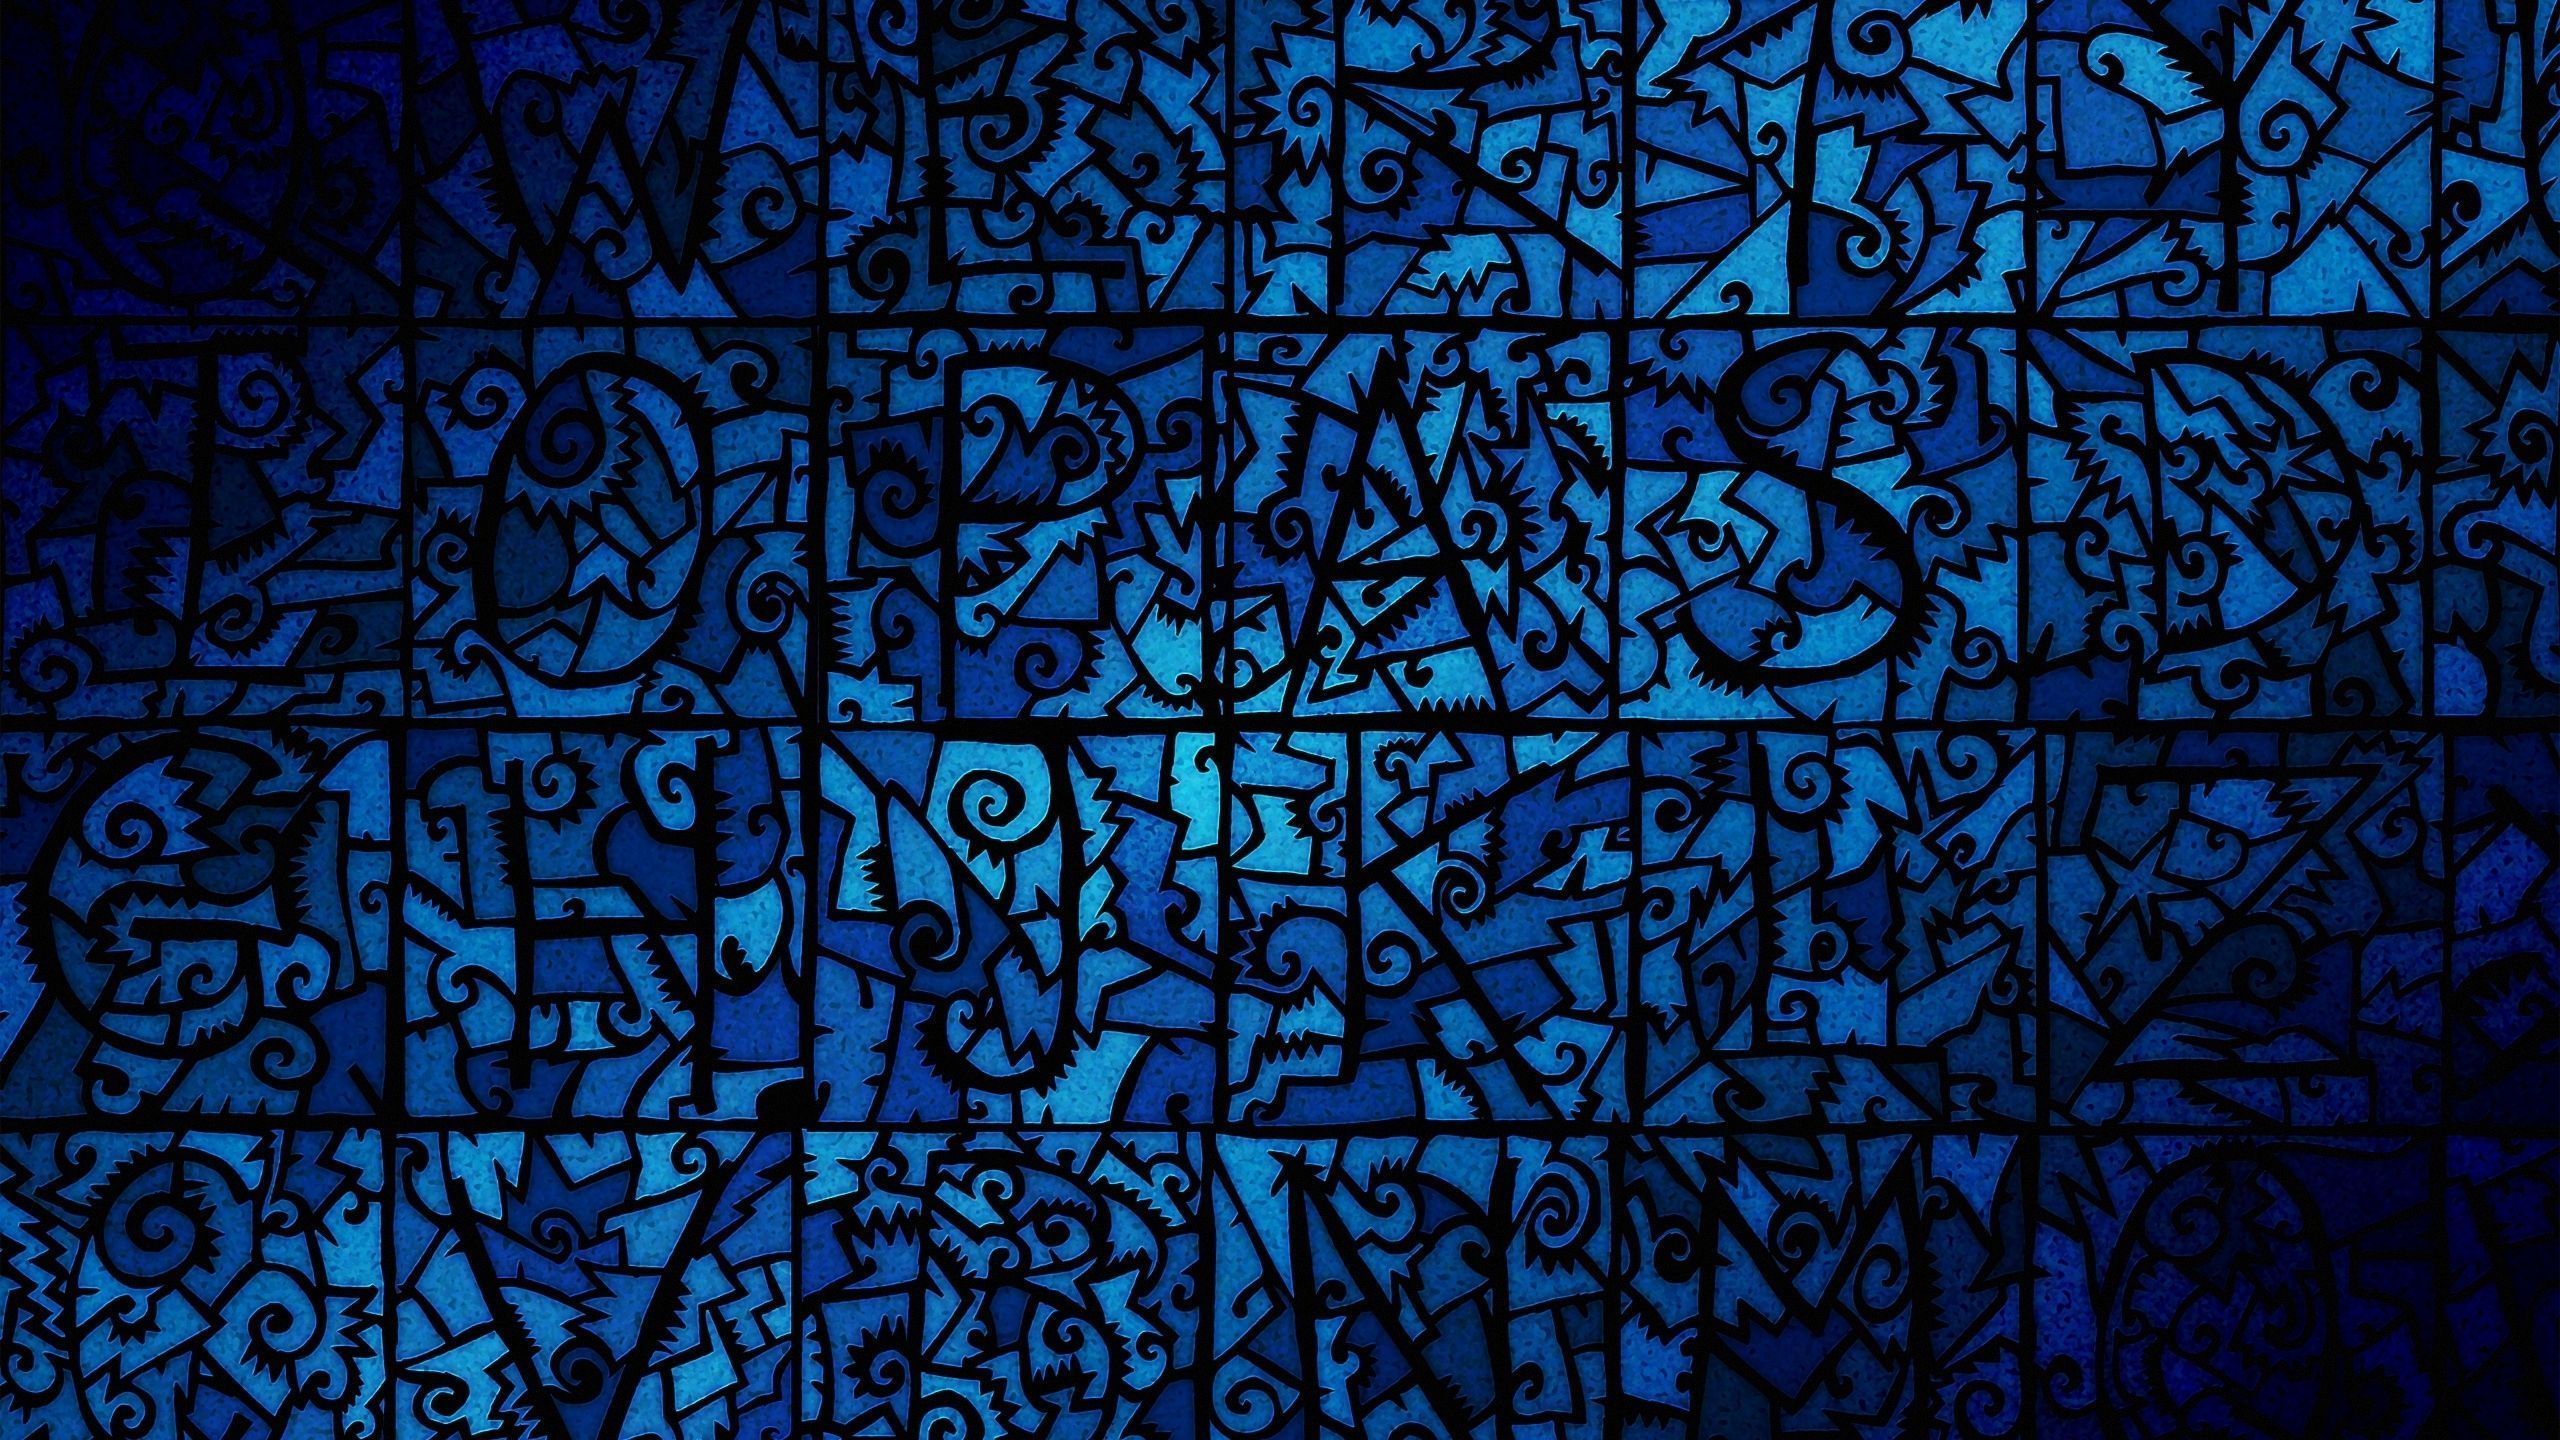 Blue Stained Glass Mac Wallpaper Download | Free Mac Wallpapers ...